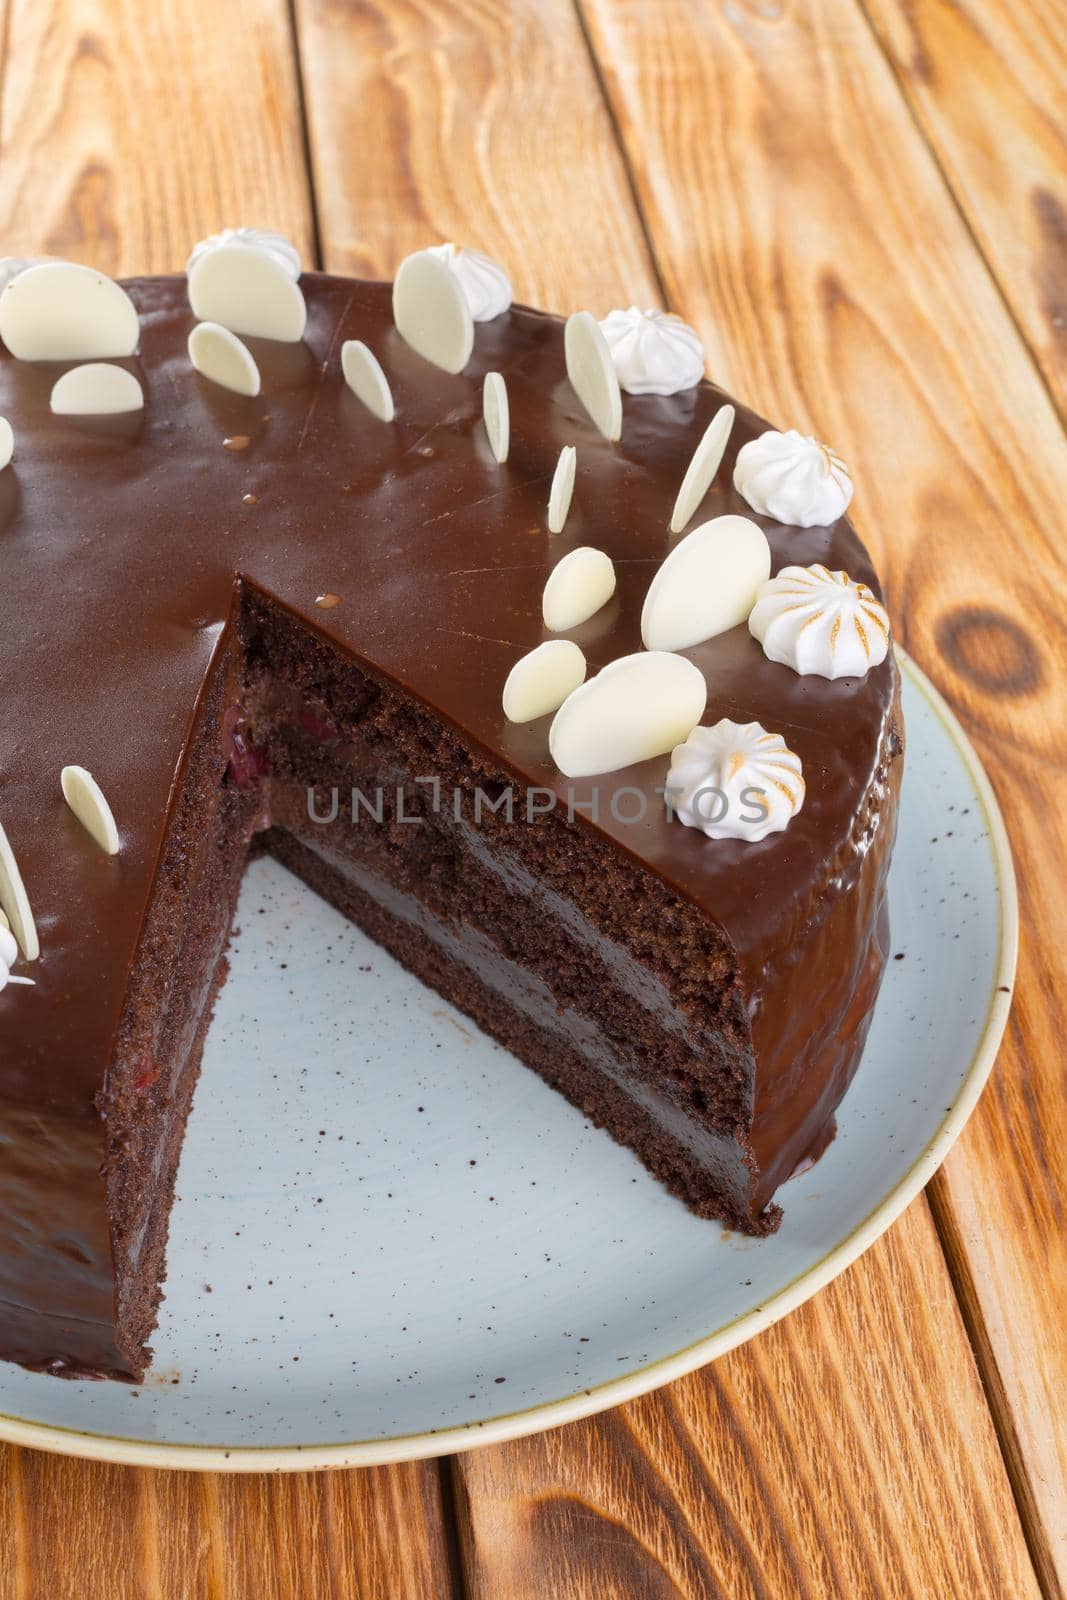 Cut chocolate cake on plate on wooden table close up